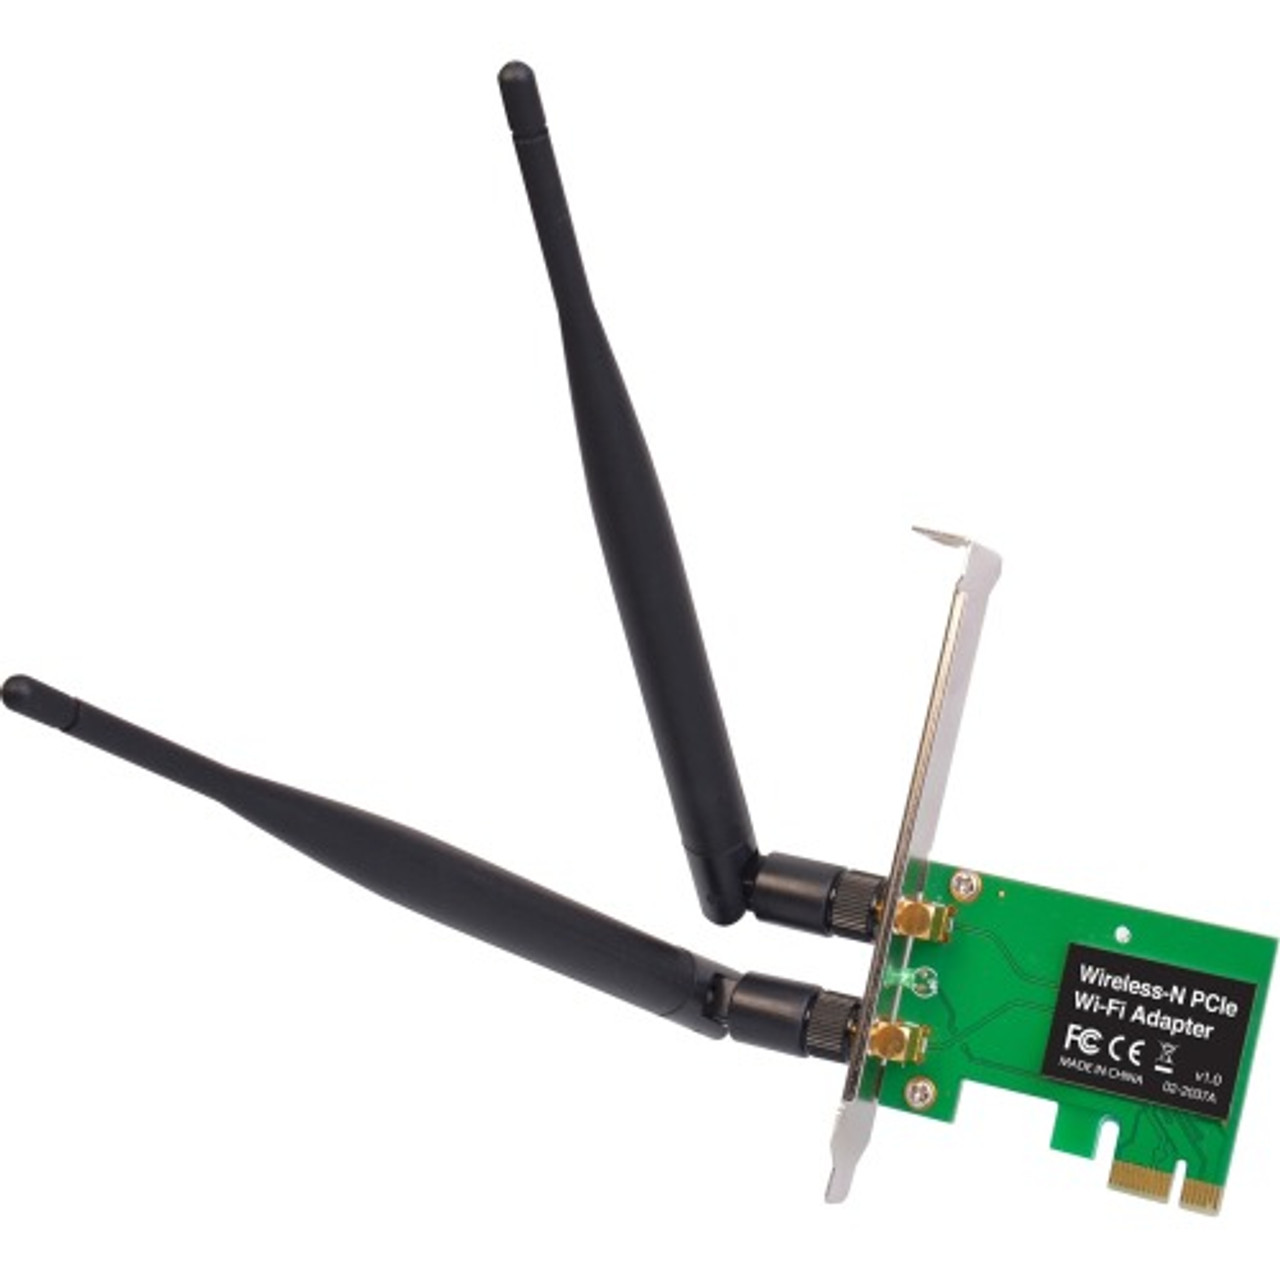 CN-WR0811-S2 SIIG Dual Profile Pci Express 2.4ghz Wireless-N Wi-Fi Adapter With Dual Antennas